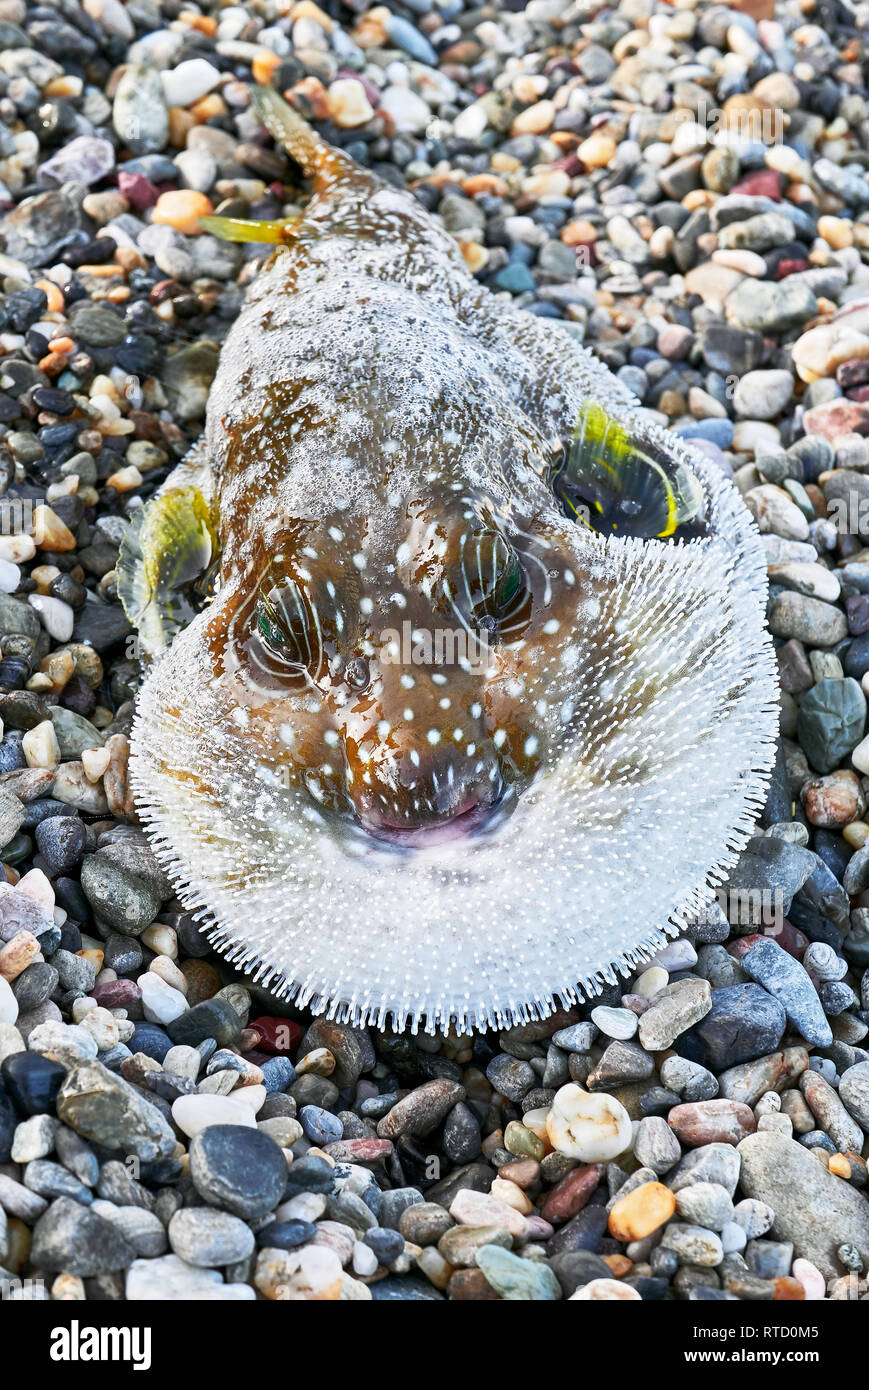 Close-up of a brown colored blown pufferfish with small yellow fins, laying on a beach, just caught in a net by fishermen in the Philippines Stock Photo